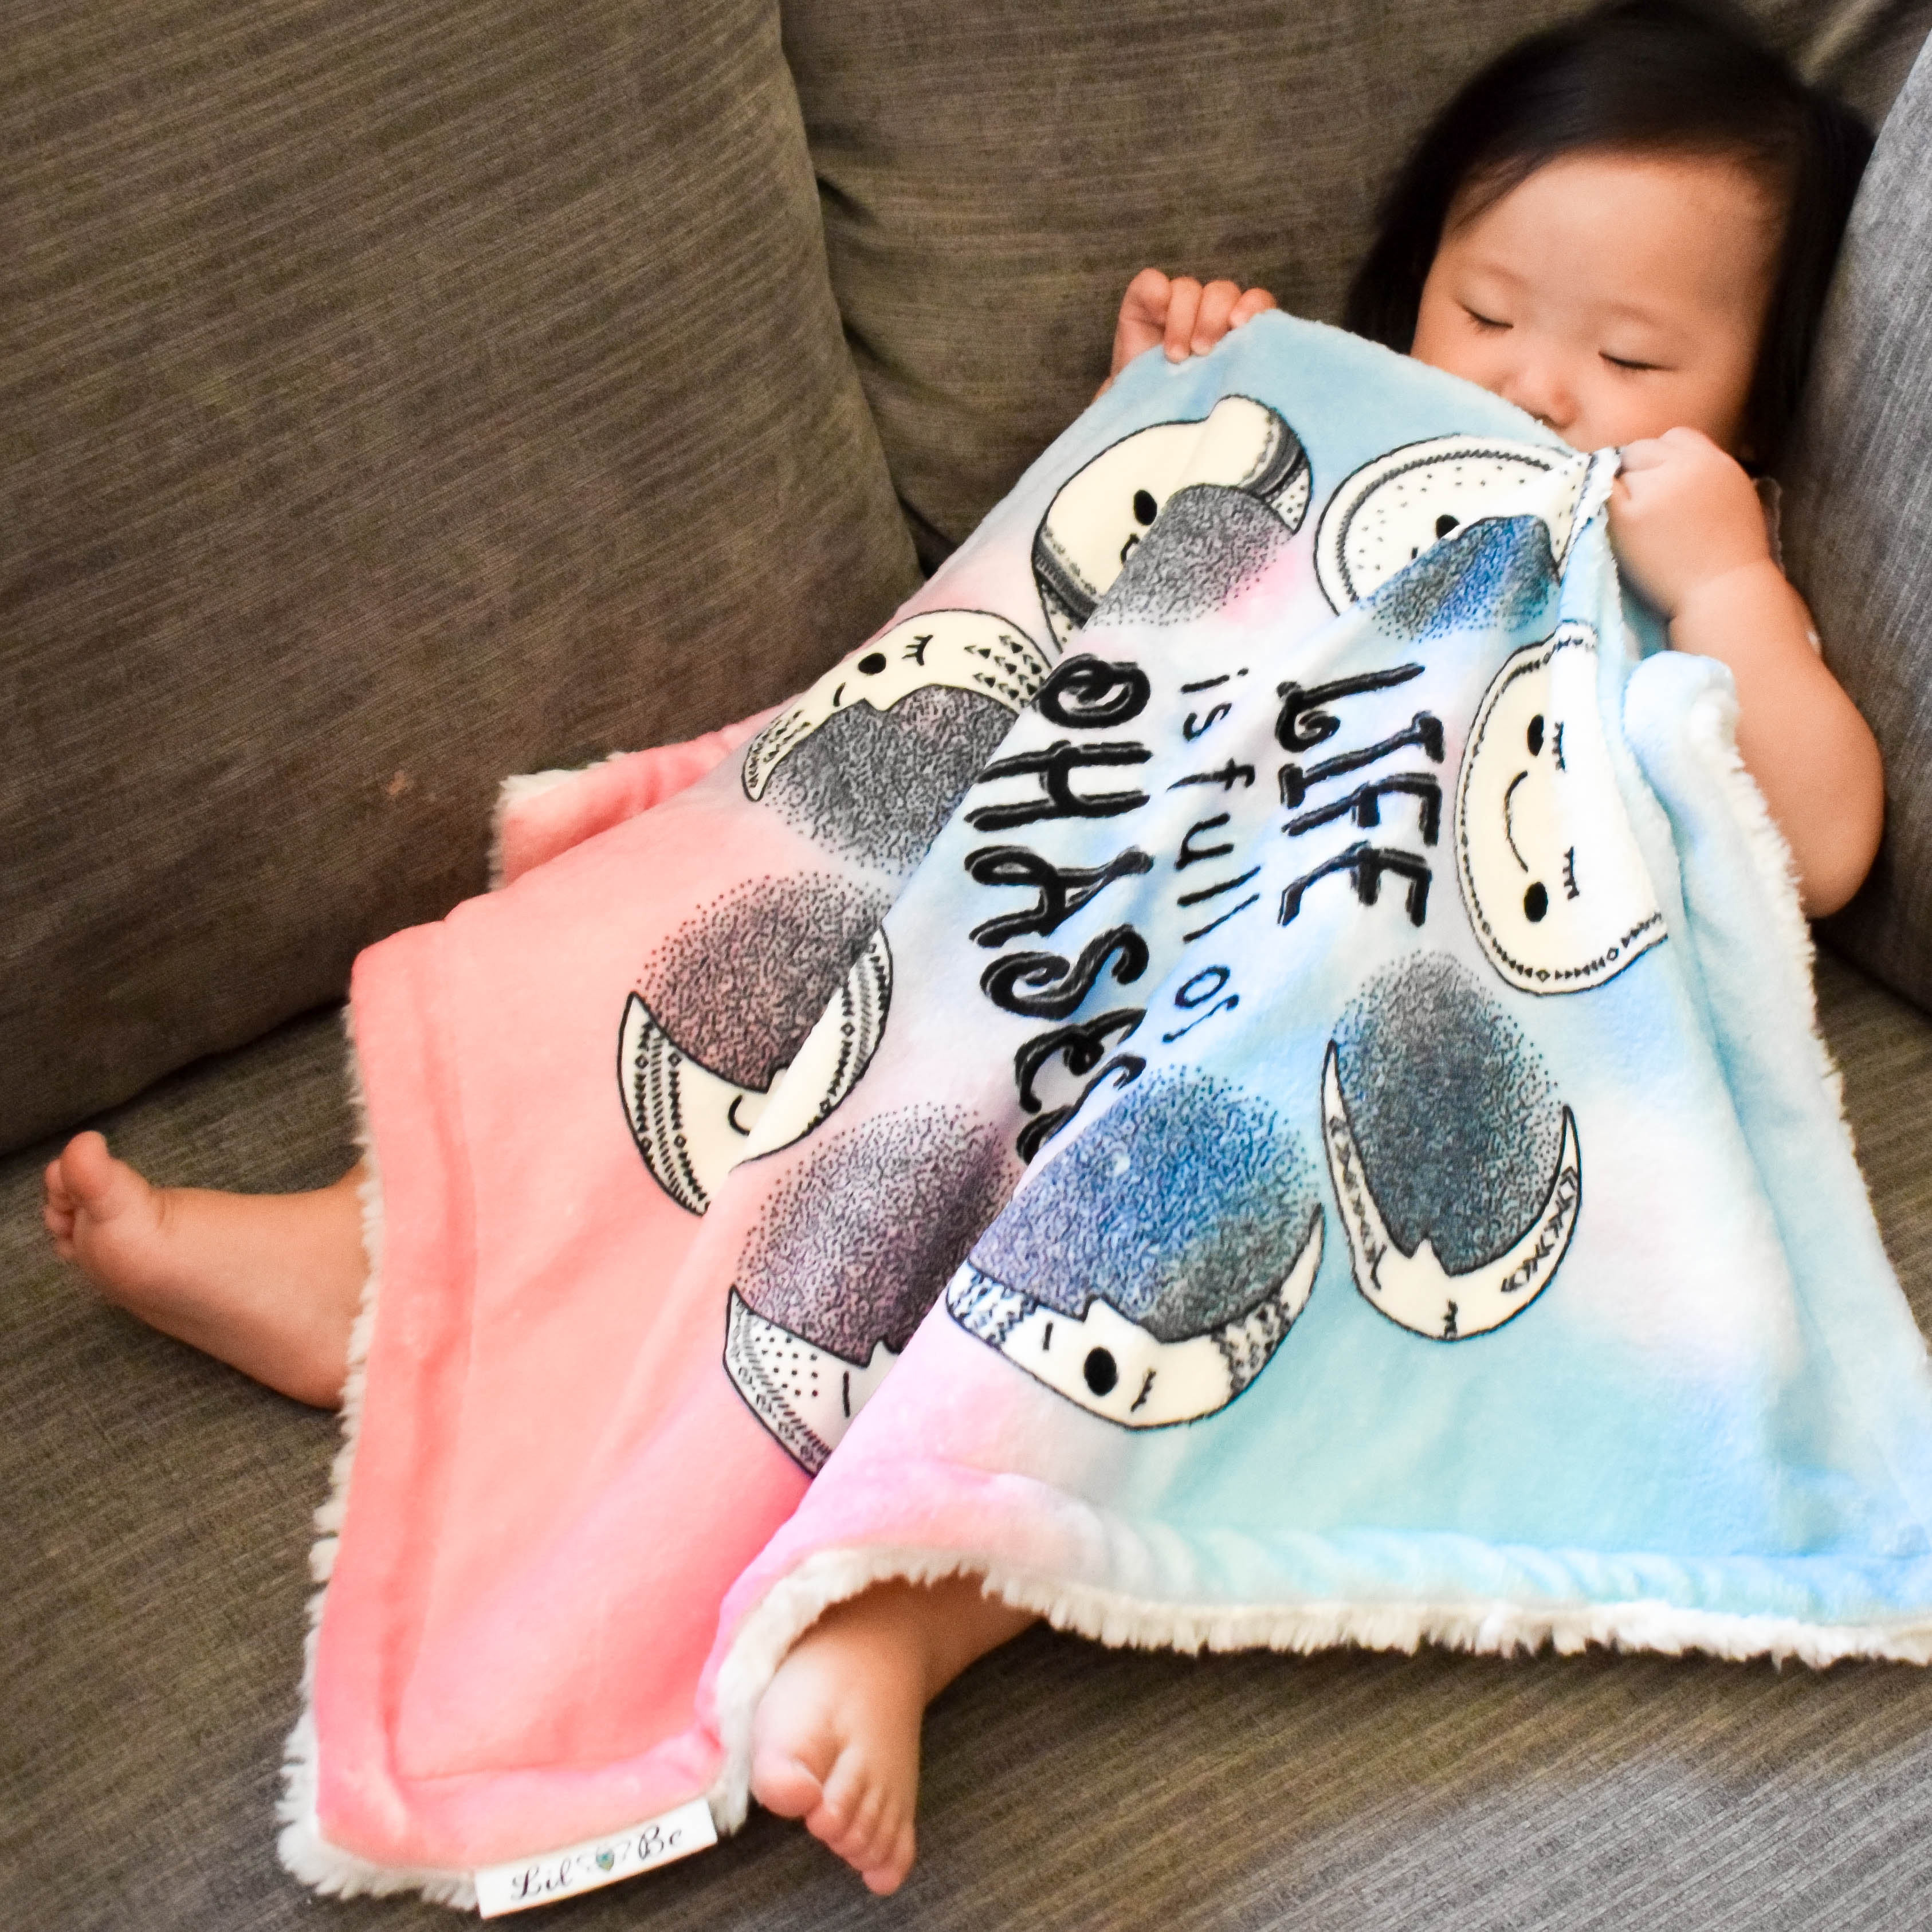 Baby Sleeping and Covered with Moon Phases Plush Security Blanket